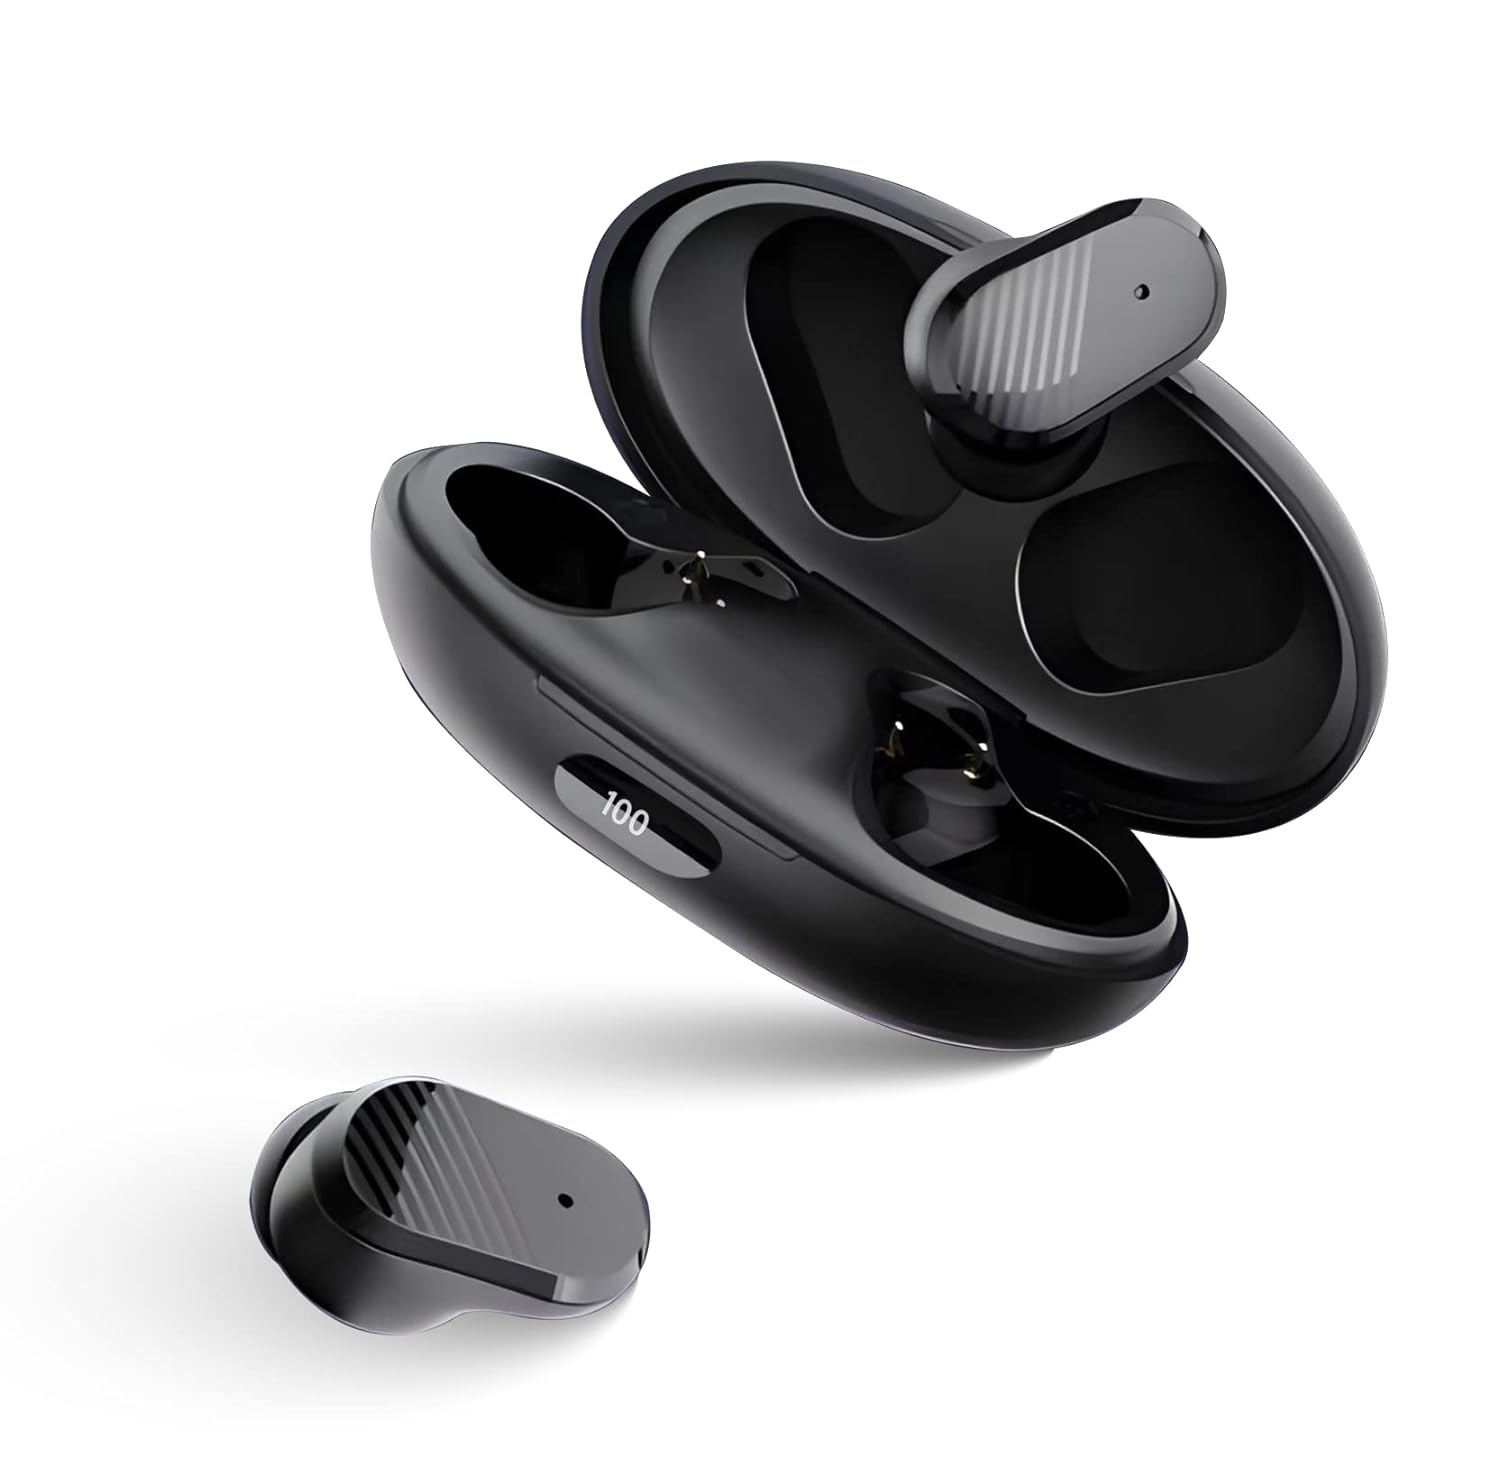 riviera THE BRAND OF NEW ERA R002 Wireless Smart Buds Bluetooth 5.1 Earbuds with 10hrs Upto Playback, Deep Bass Sound True Wireless in Ear Earbuds with Microphone for Men & Women (Black)